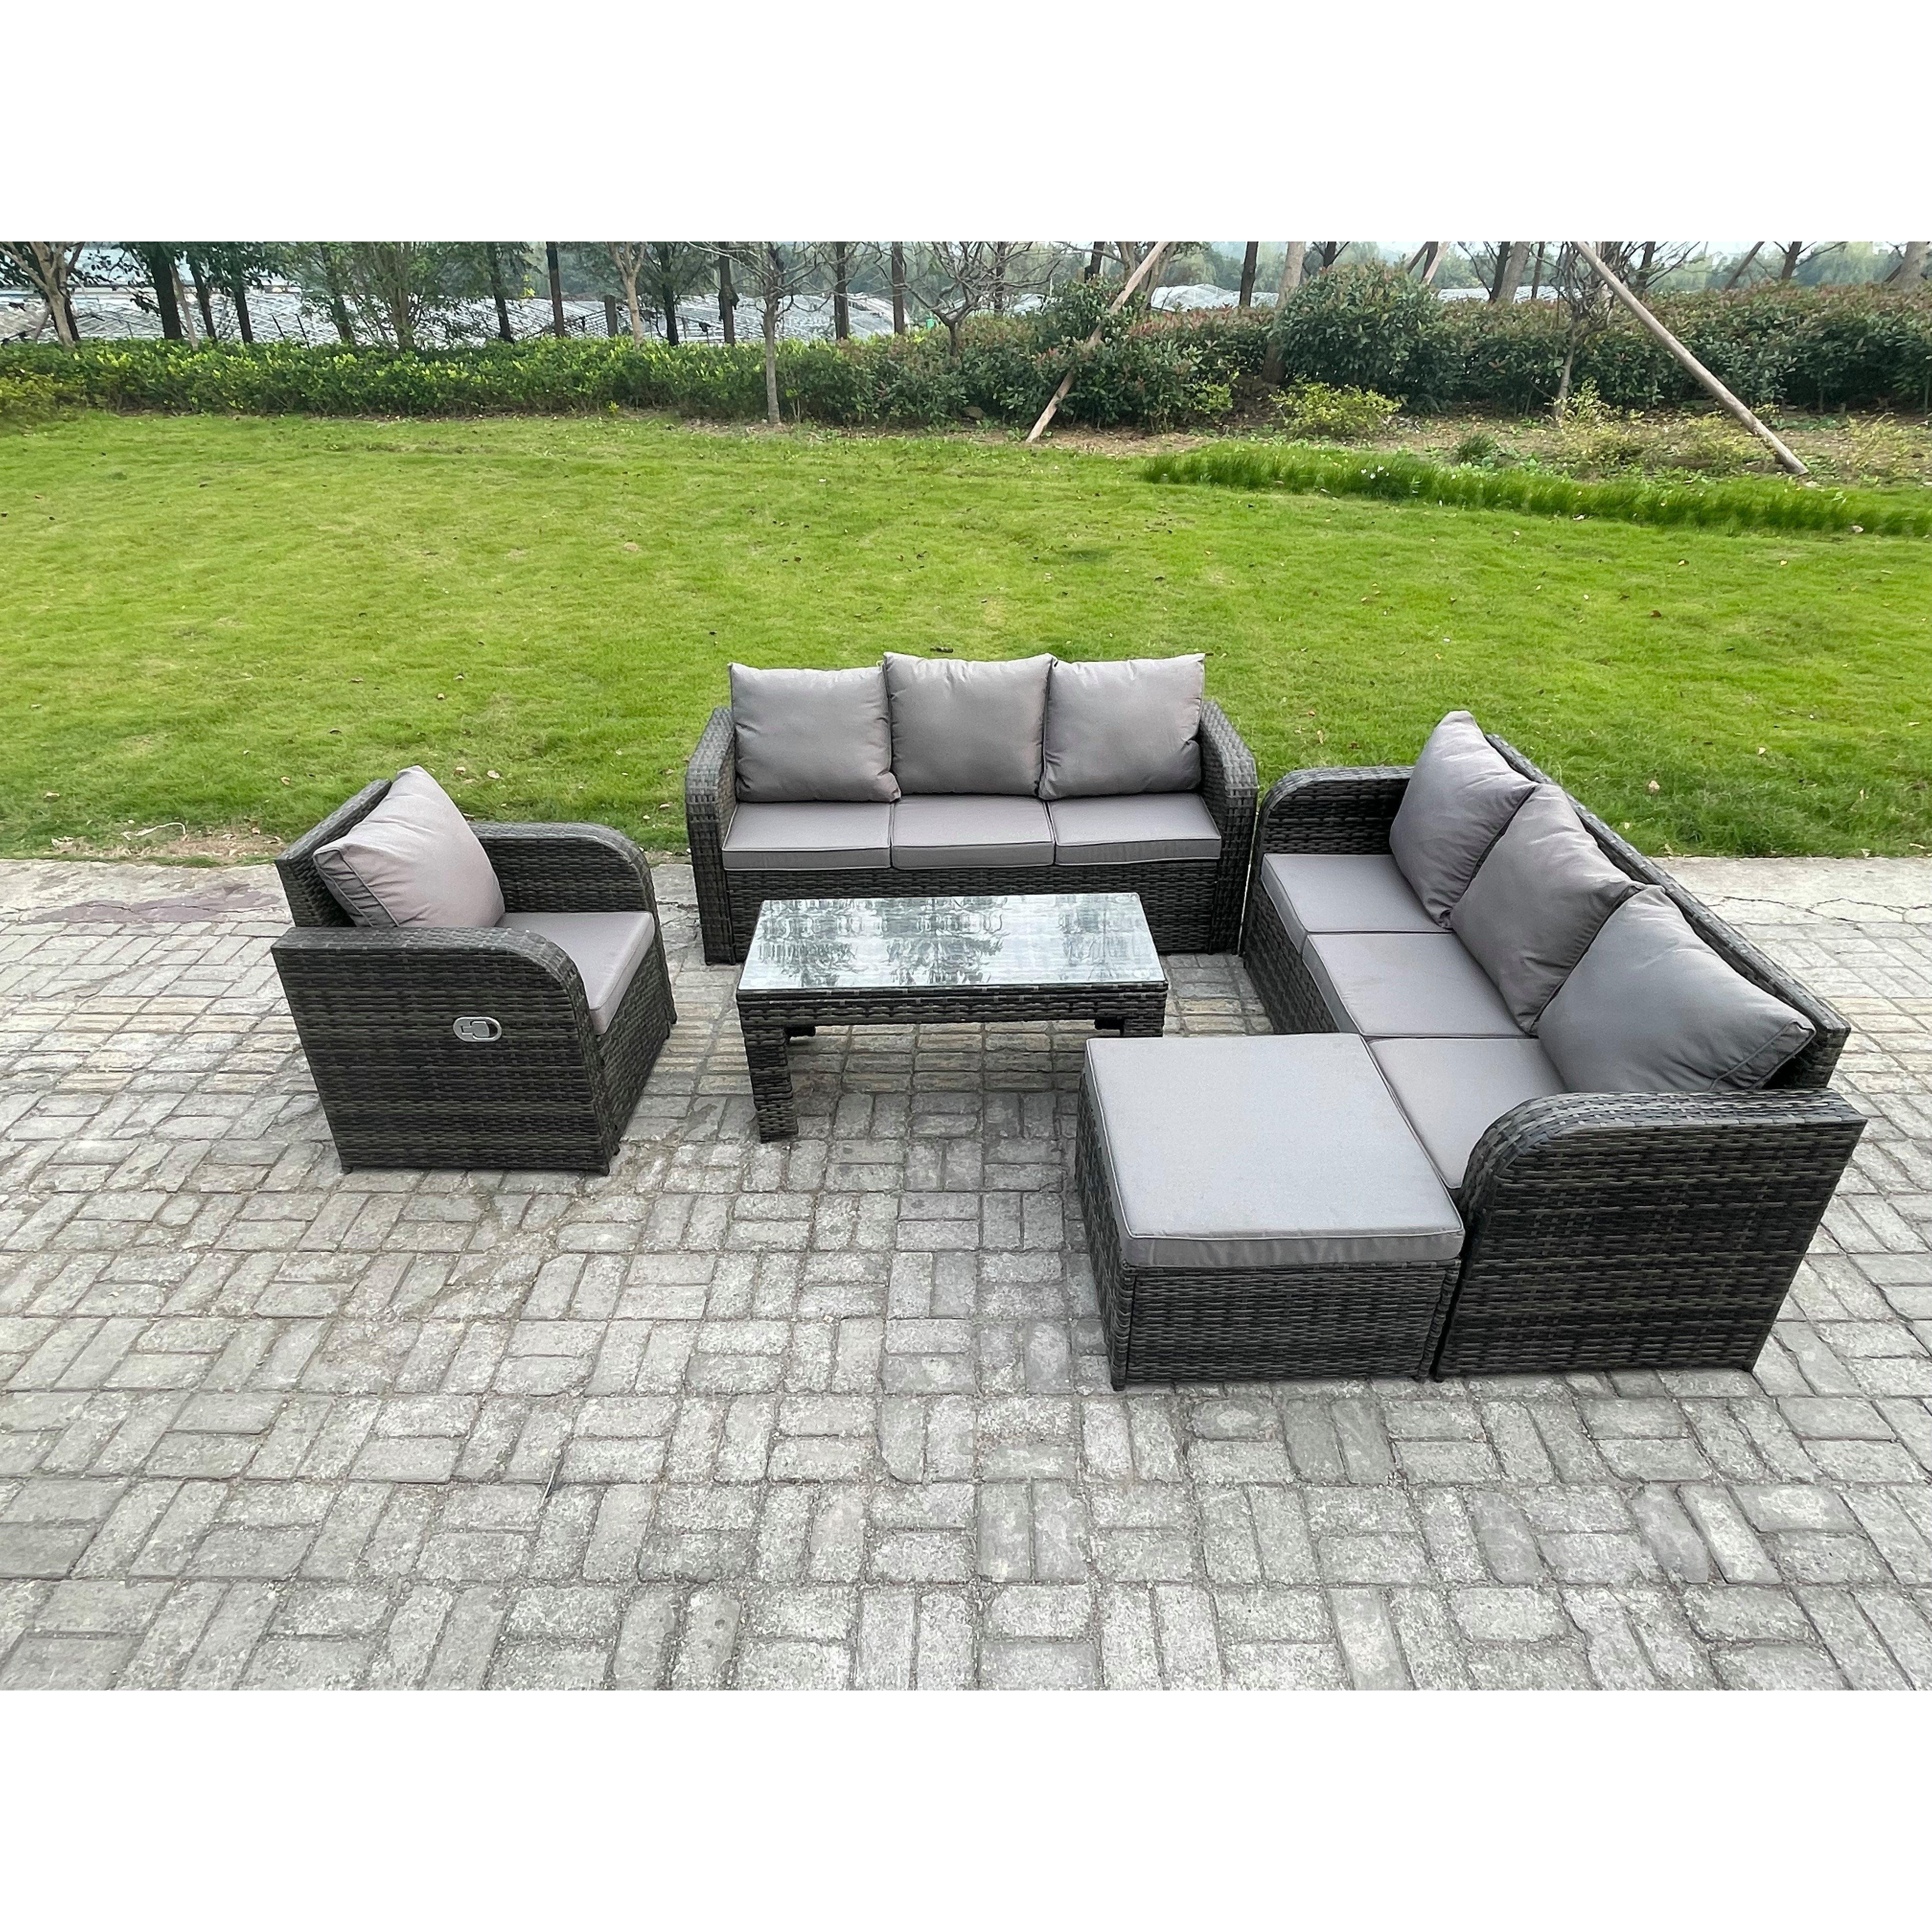 8 Seater Wicker PE Rattan Sofa Set Outdoor Patio Garden Furniture Set with Reclining Chairs Coffee Table Big Footstool - image 1